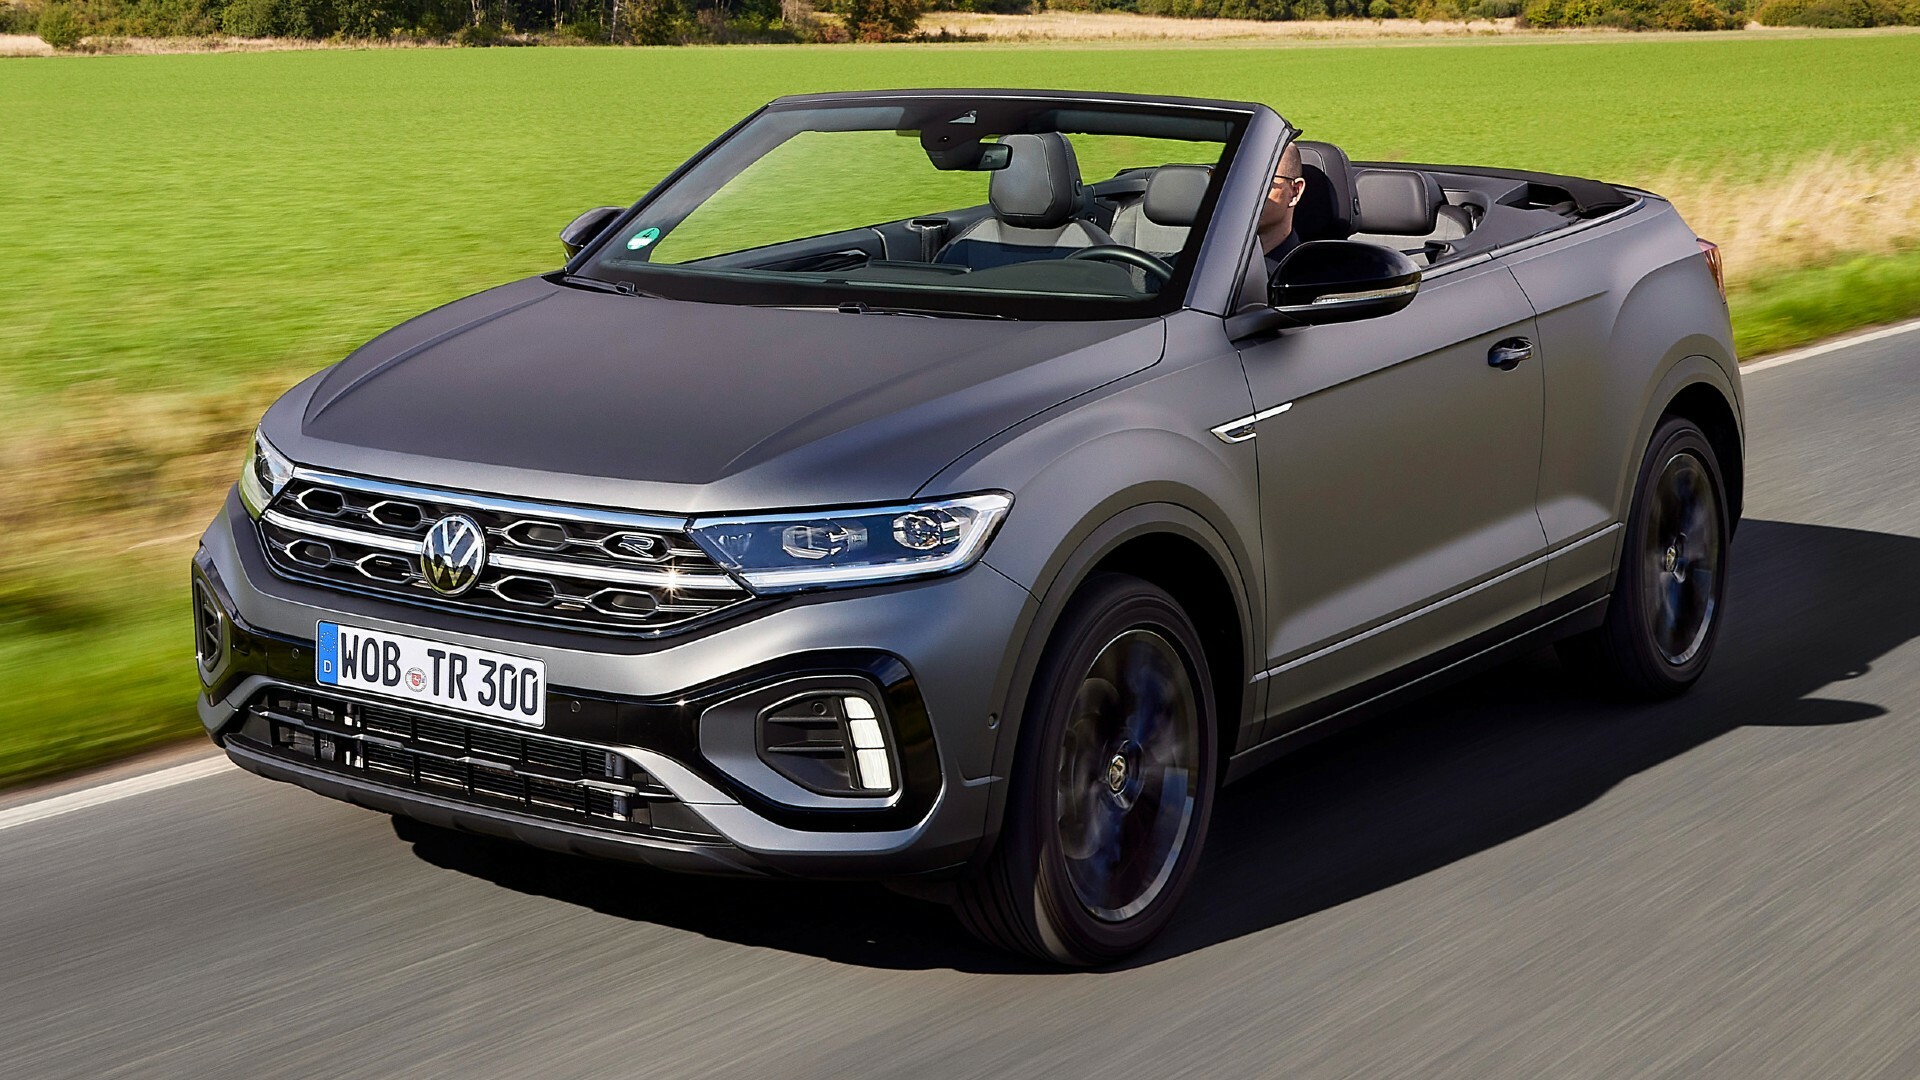 VW T-Roc Cabriolet's New Edition Grey Adds Matt Grey Paint And A